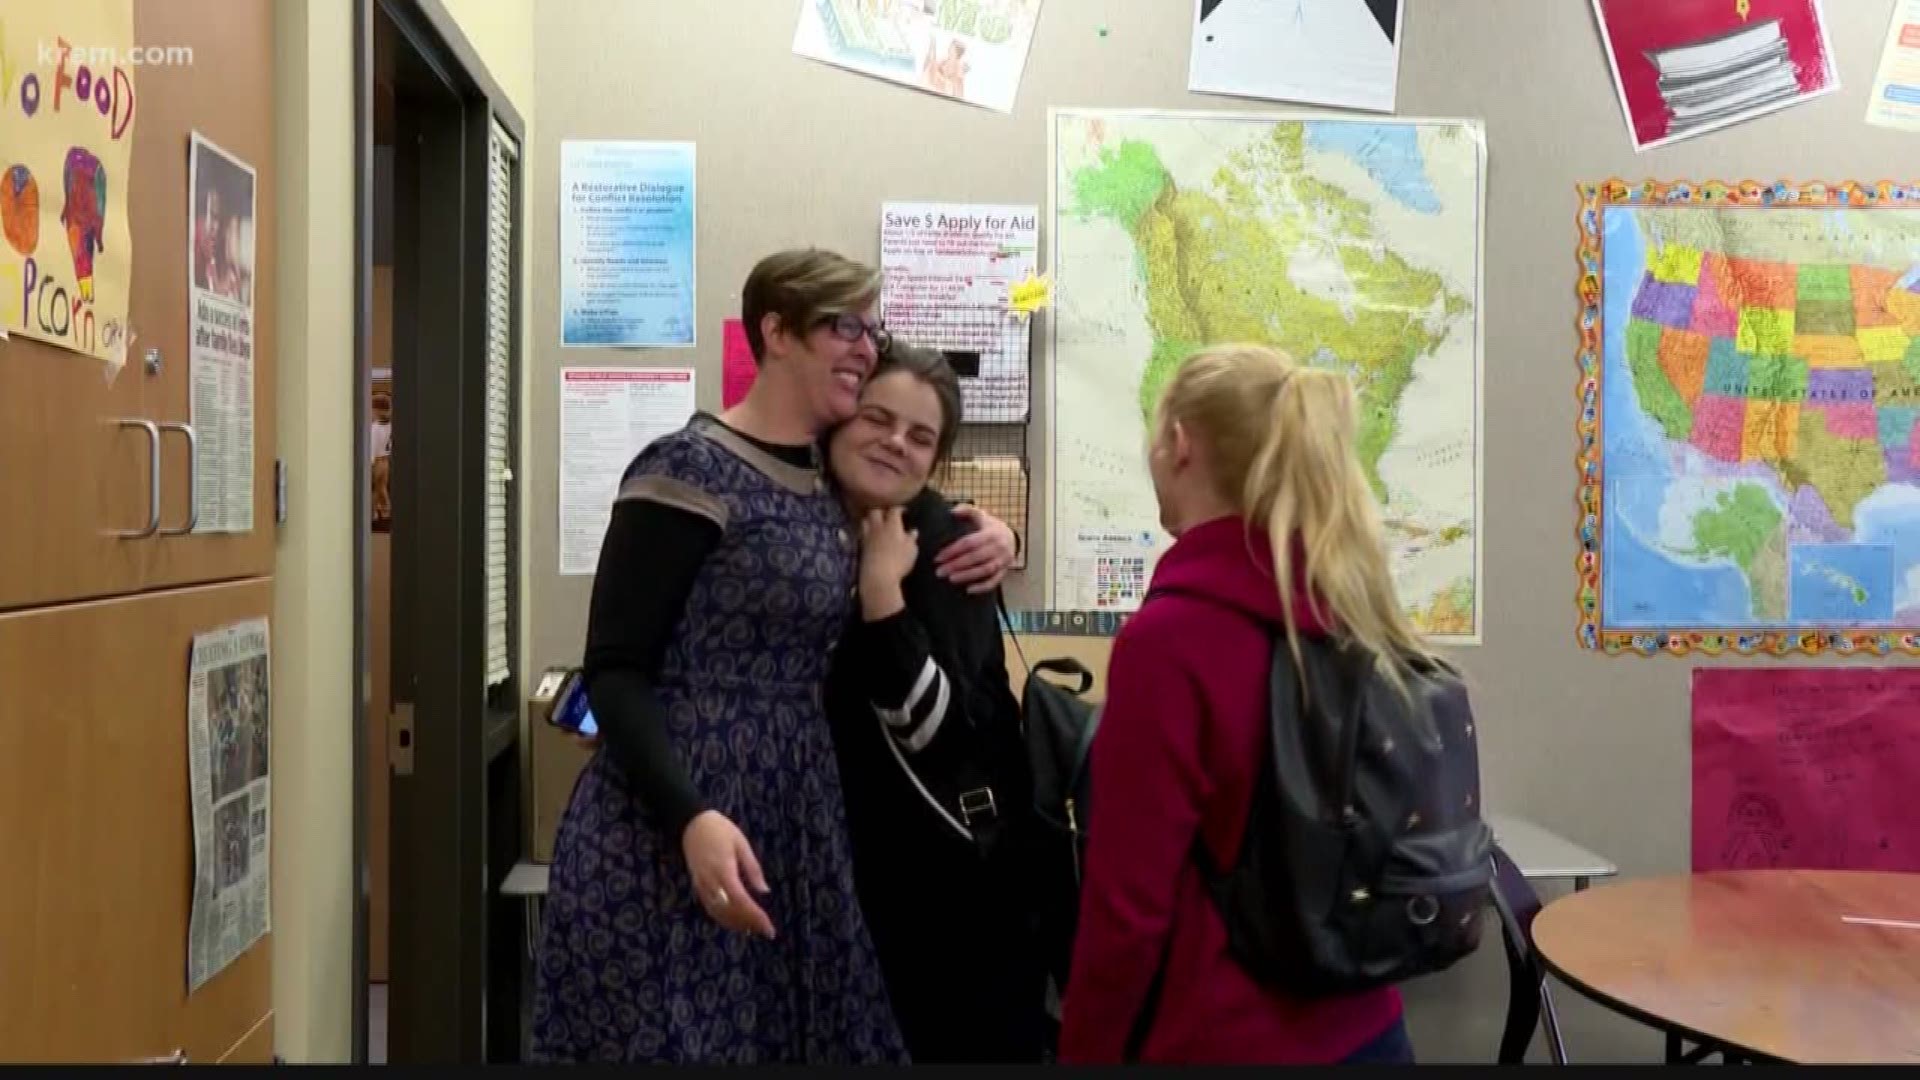 KREM Reporter Alexa Block spoke with Mandy Manning, a Spokane teacher who was named National Teacher of the Year, about funding cuts to schools across the state.